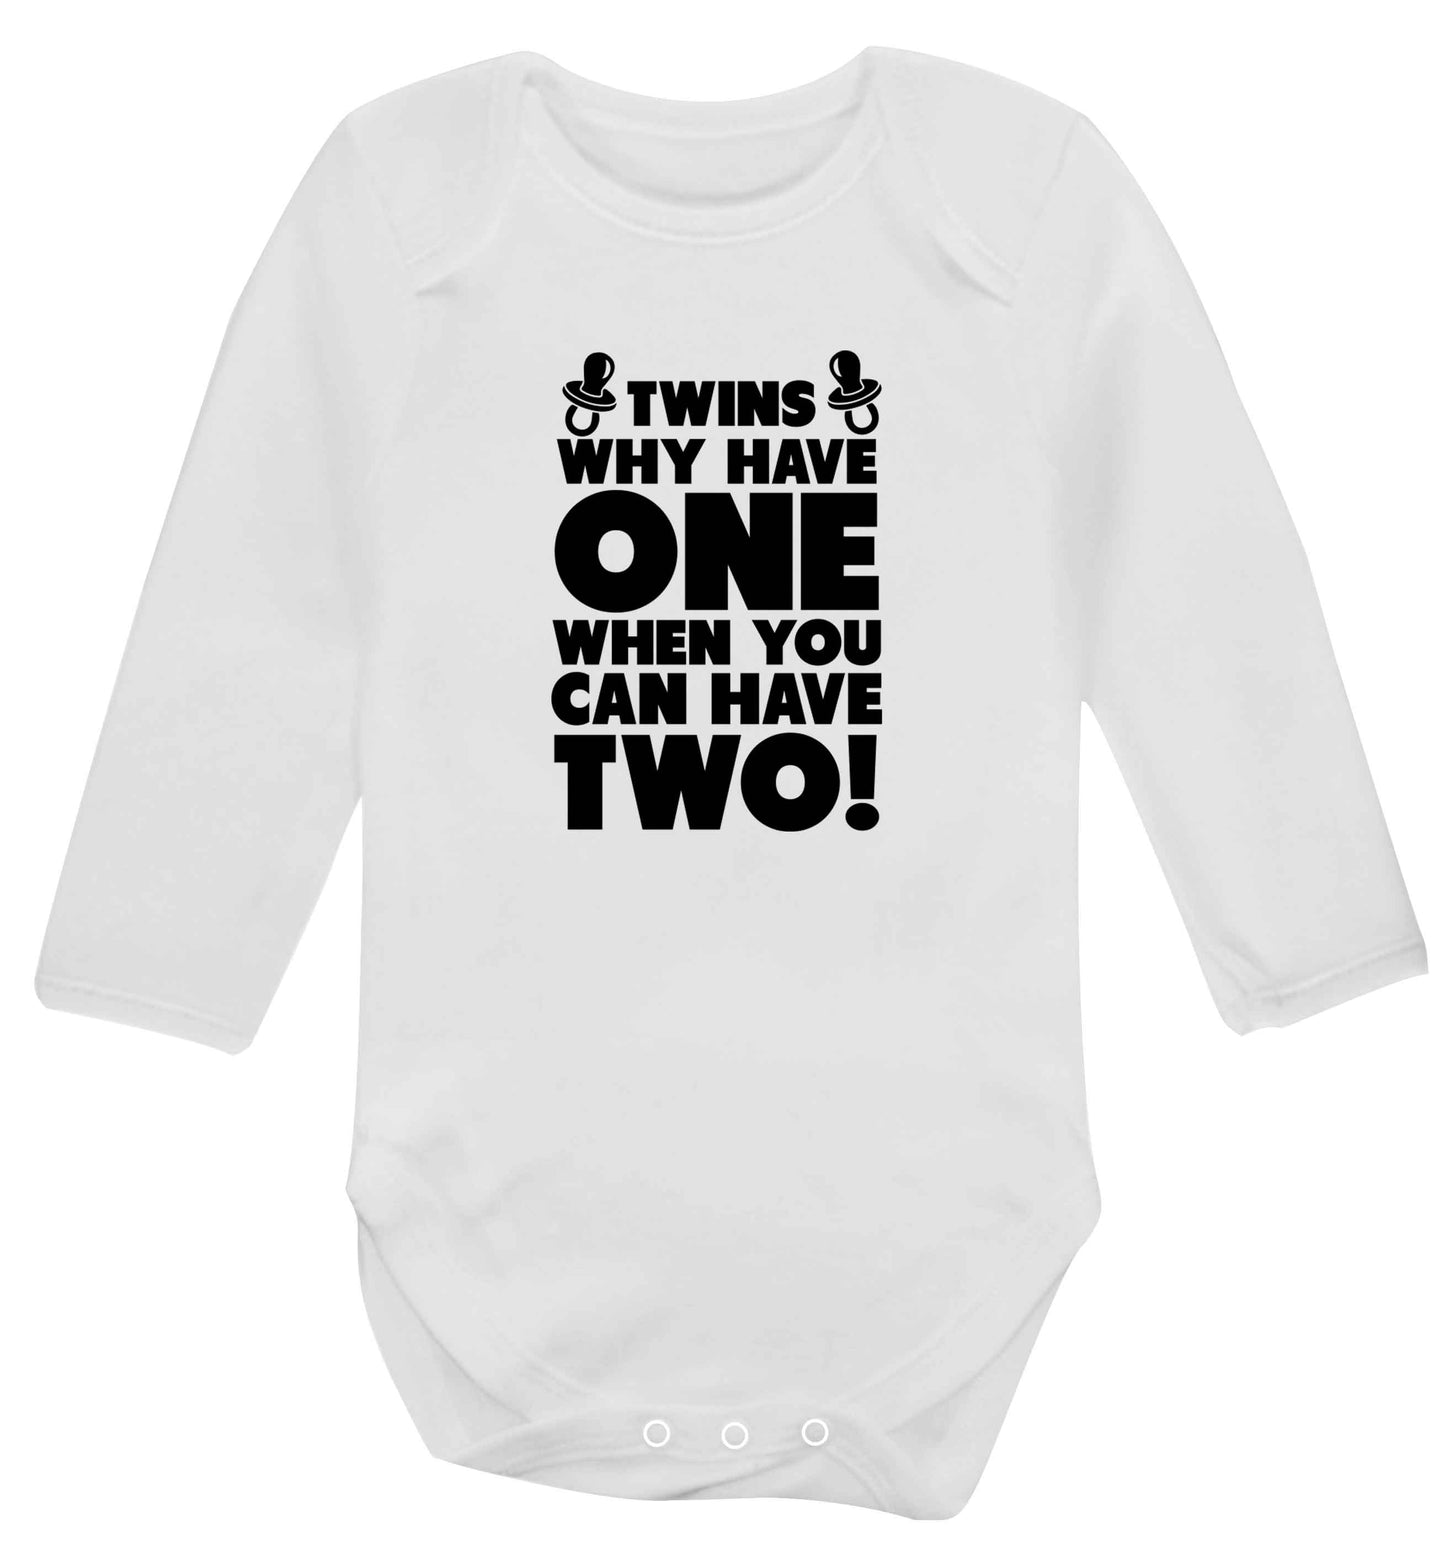 Twins why have one when you can have two baby vest long sleeved white 6-12 months